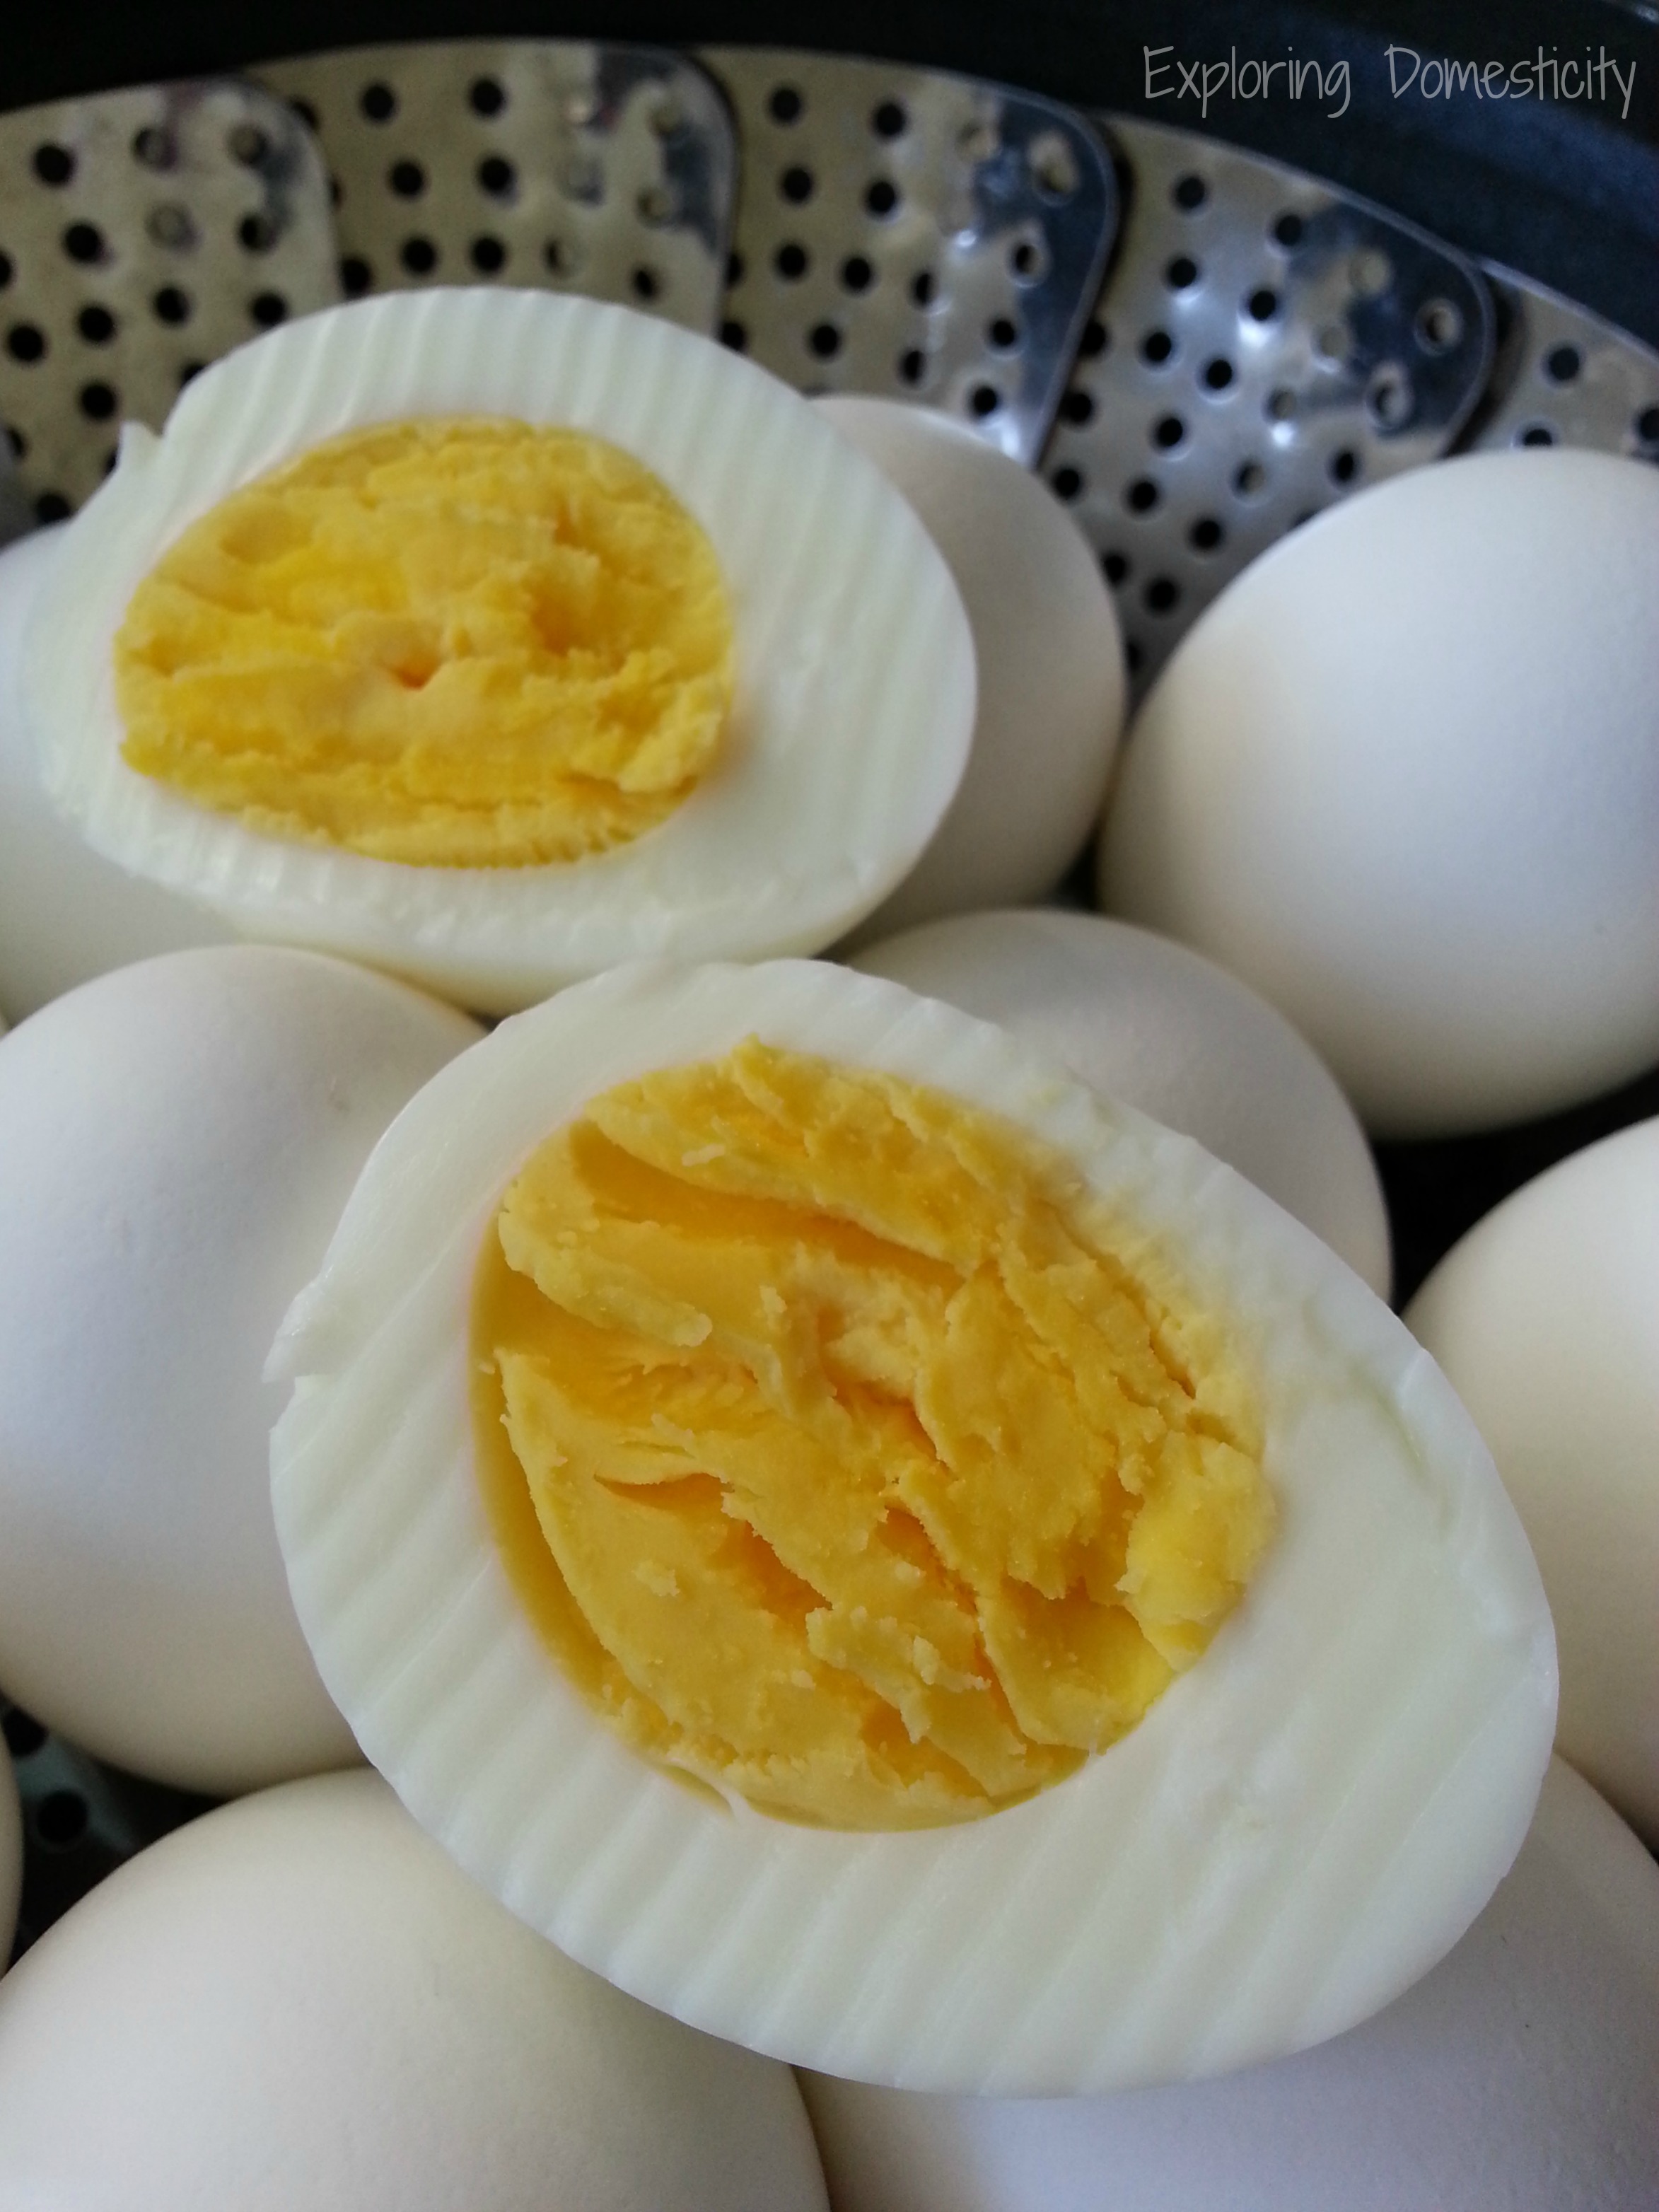 Easy to Peel Perfect Hard-Boiled Eggs ⋆ Exploring Domesticity